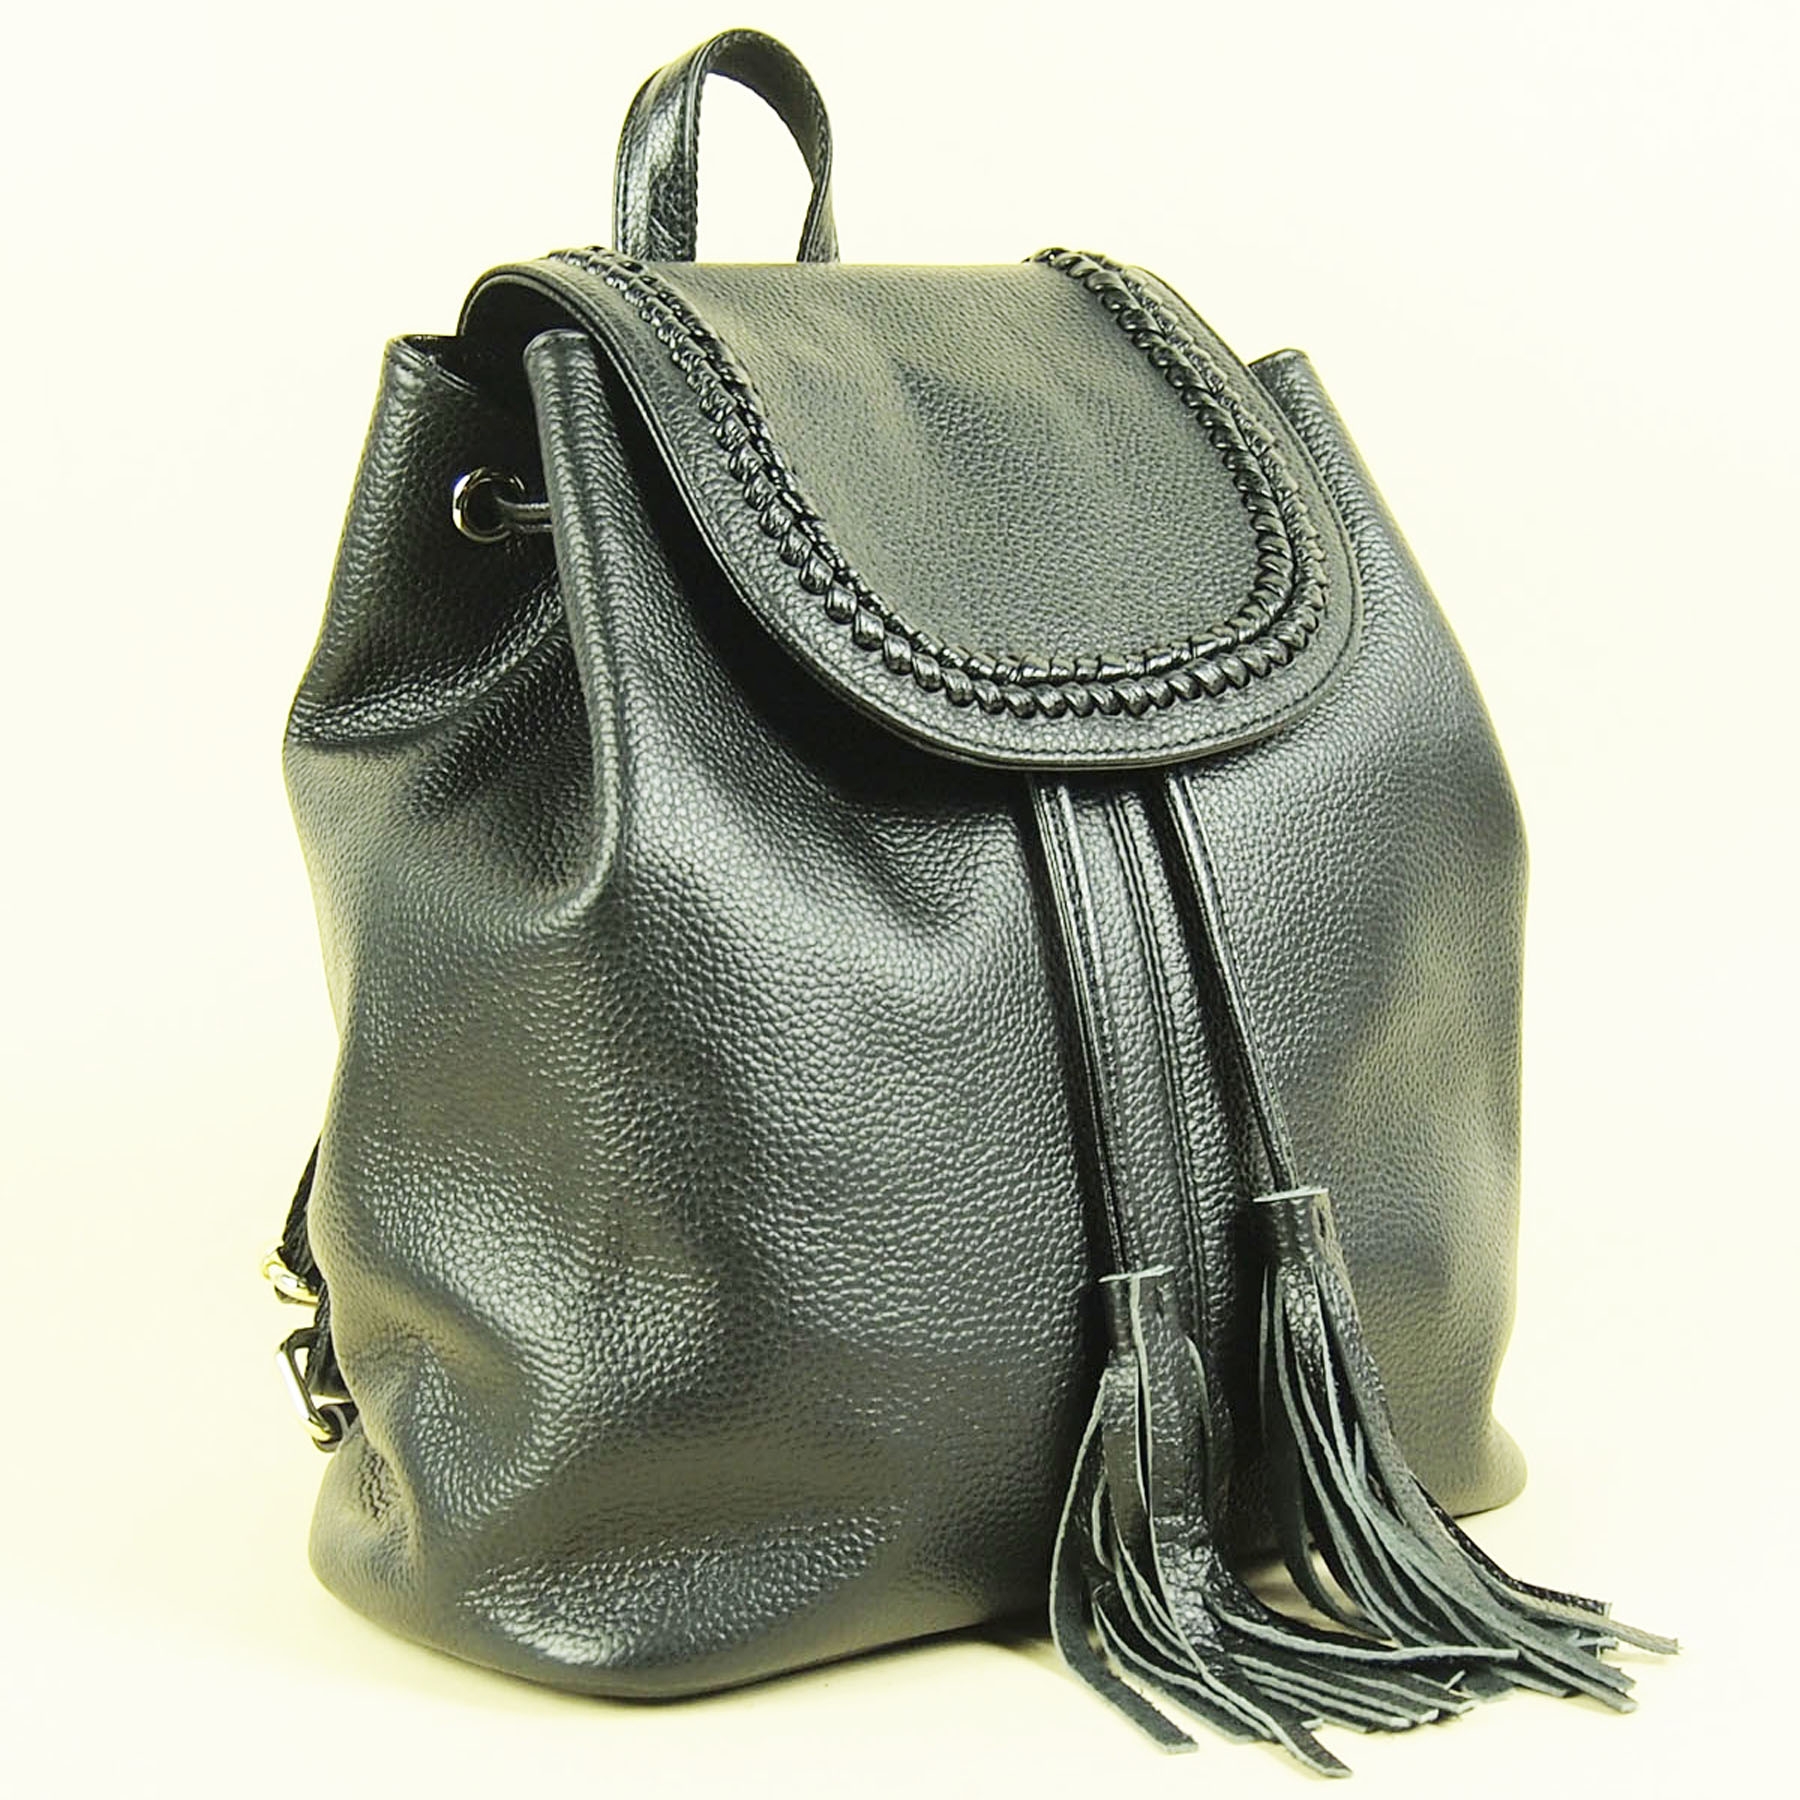 Super Urban Forest Muriel Backpack Front View